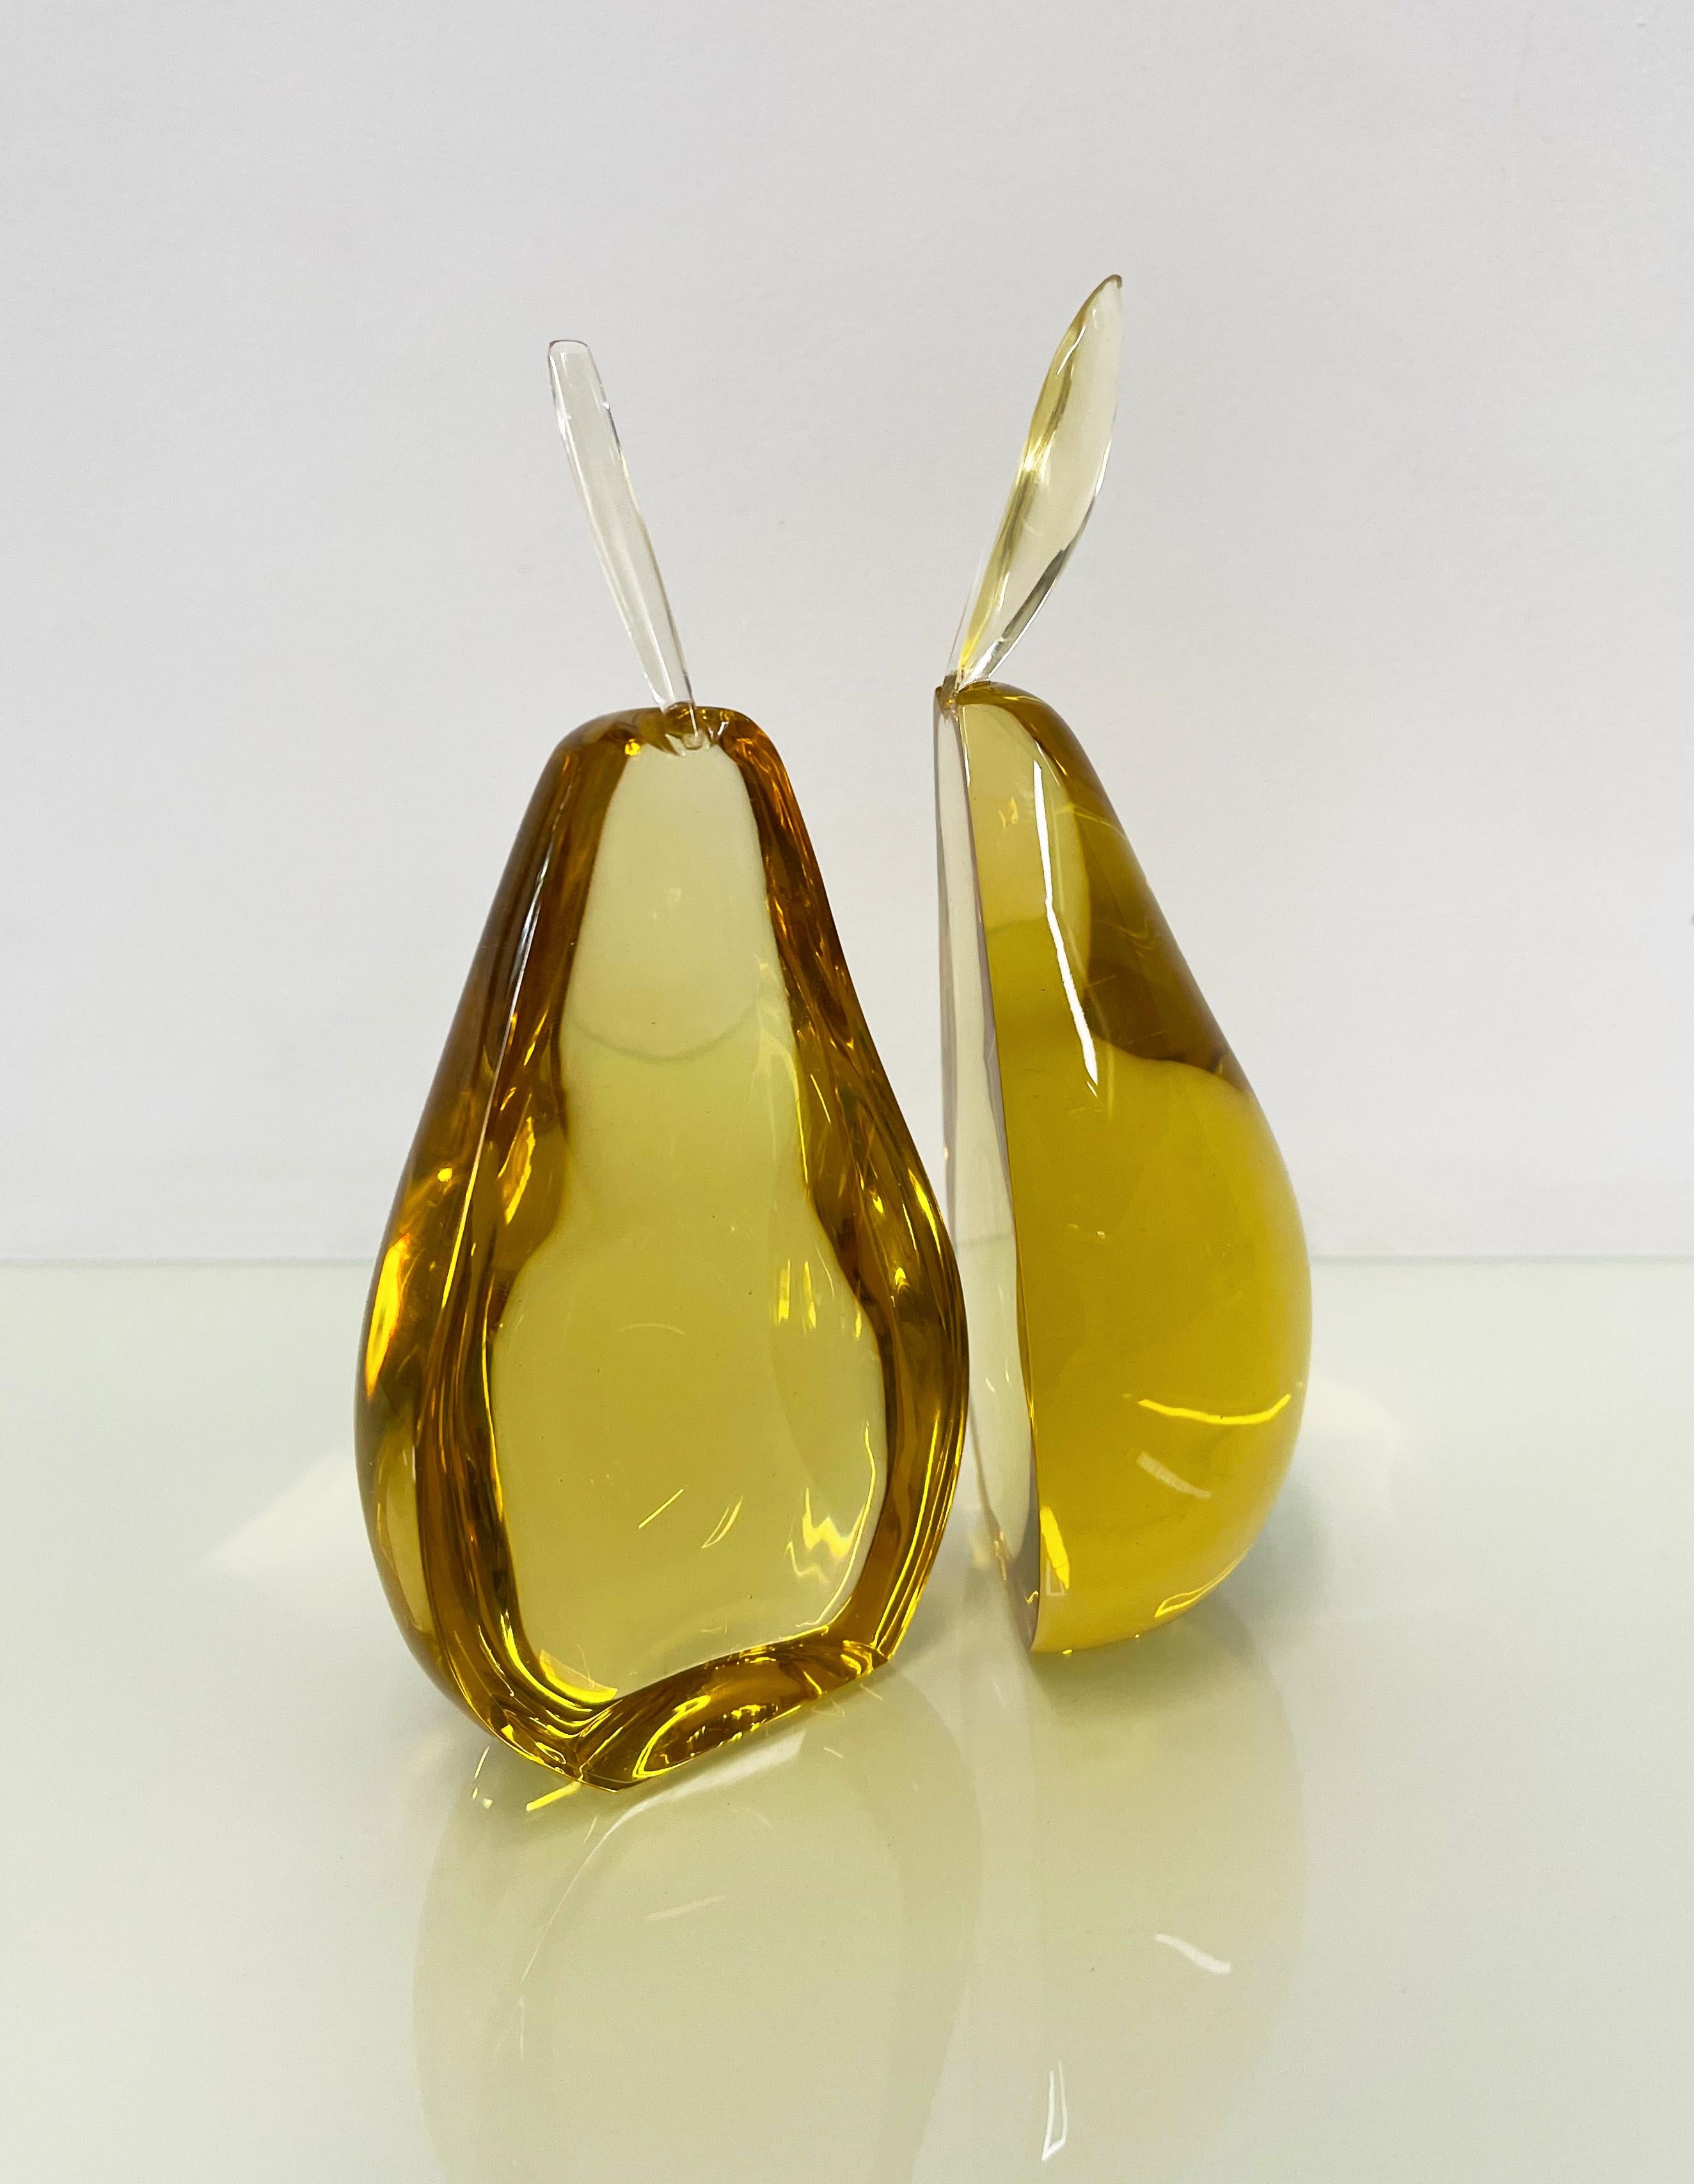 Italian Contemporary 'Pear' Sculpture Amber Yellow Crystal Handcrafted by Ghirò Studio For Sale